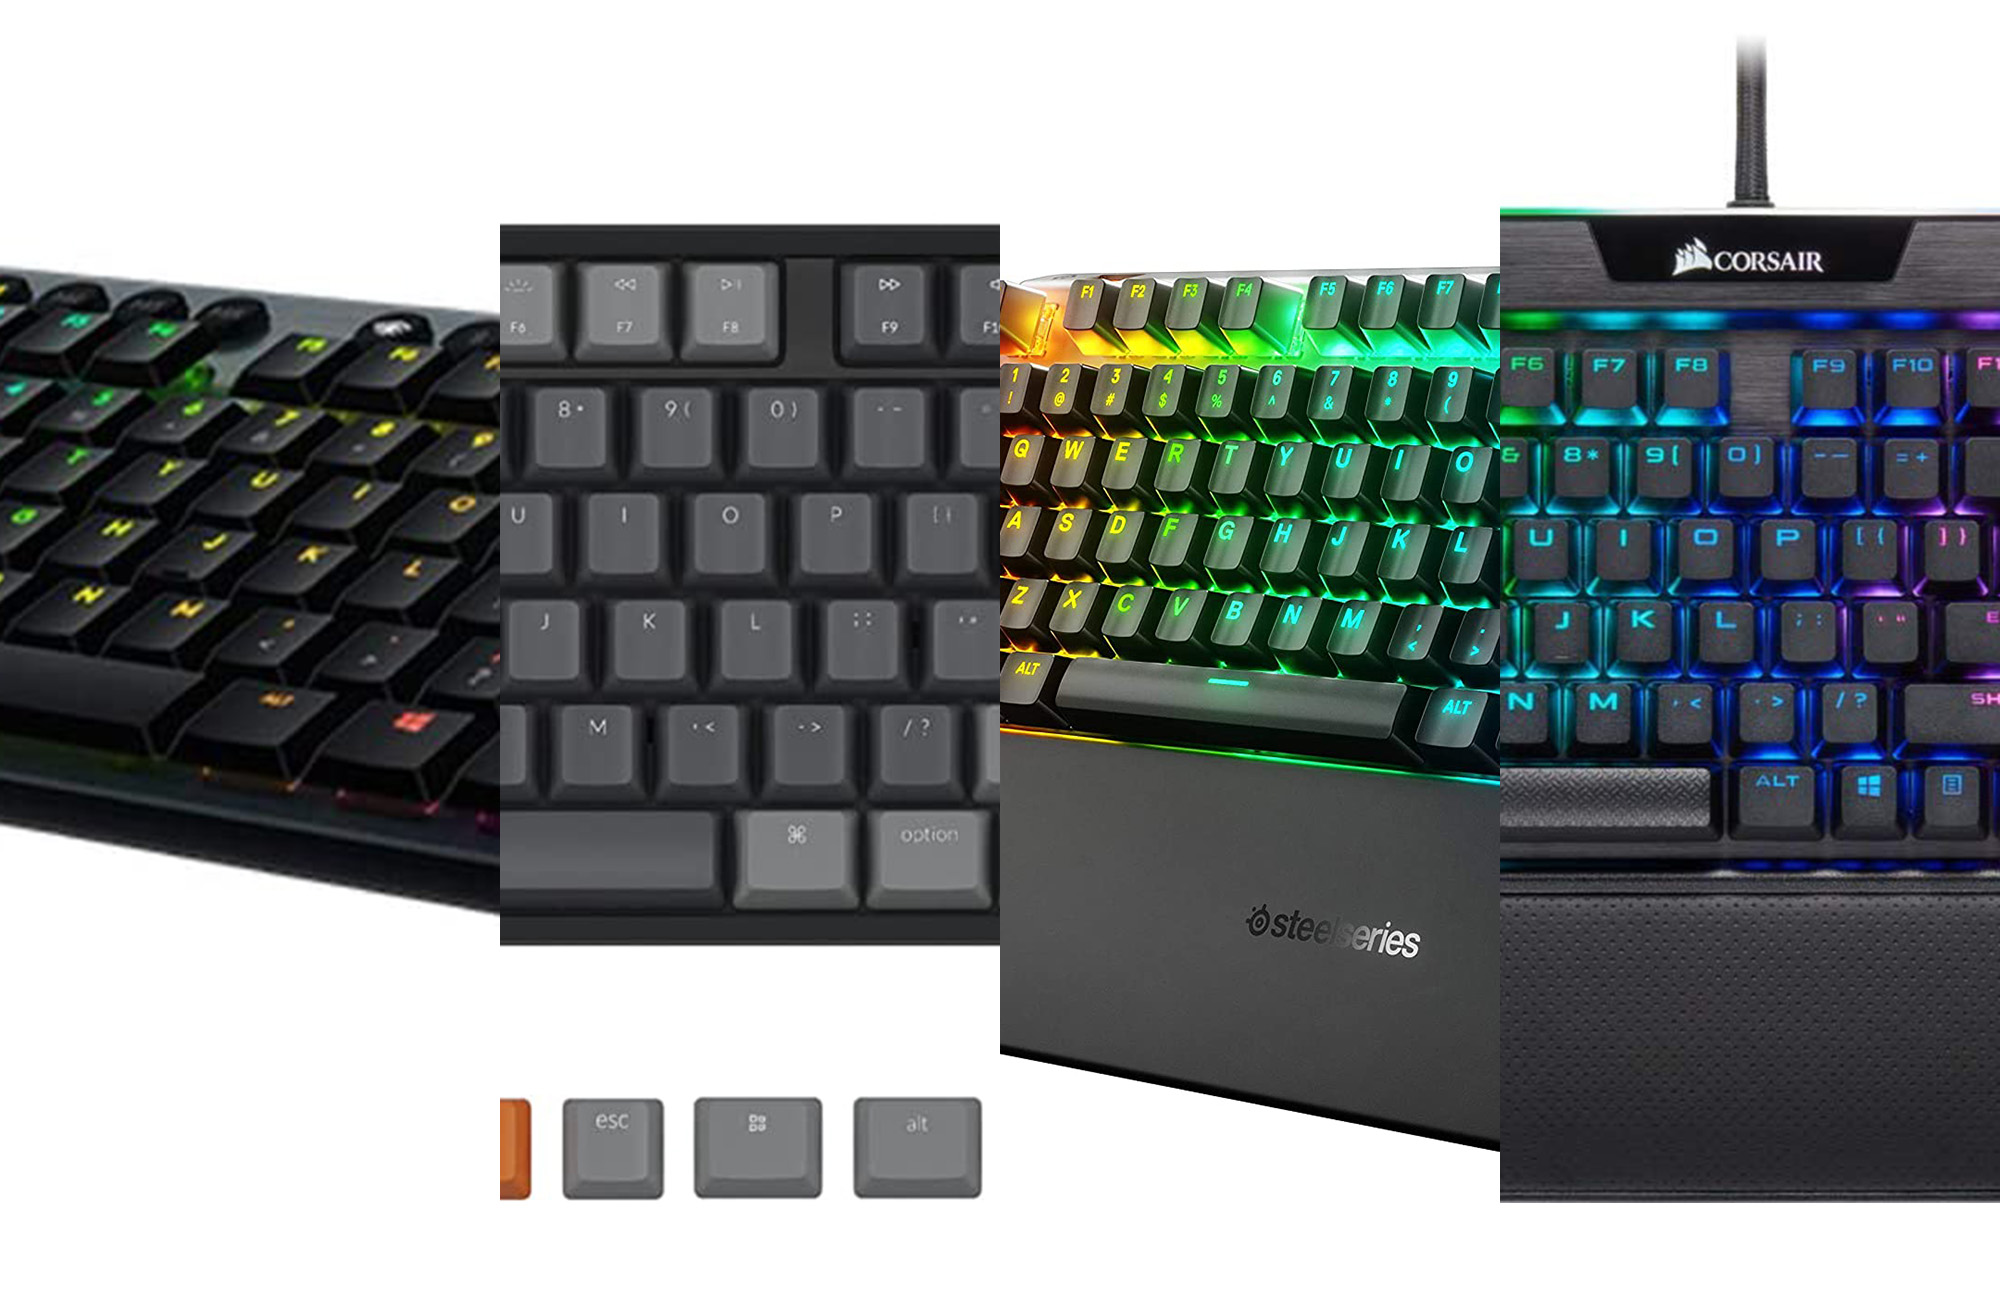 Are mechanical keyboards really good for gaming?